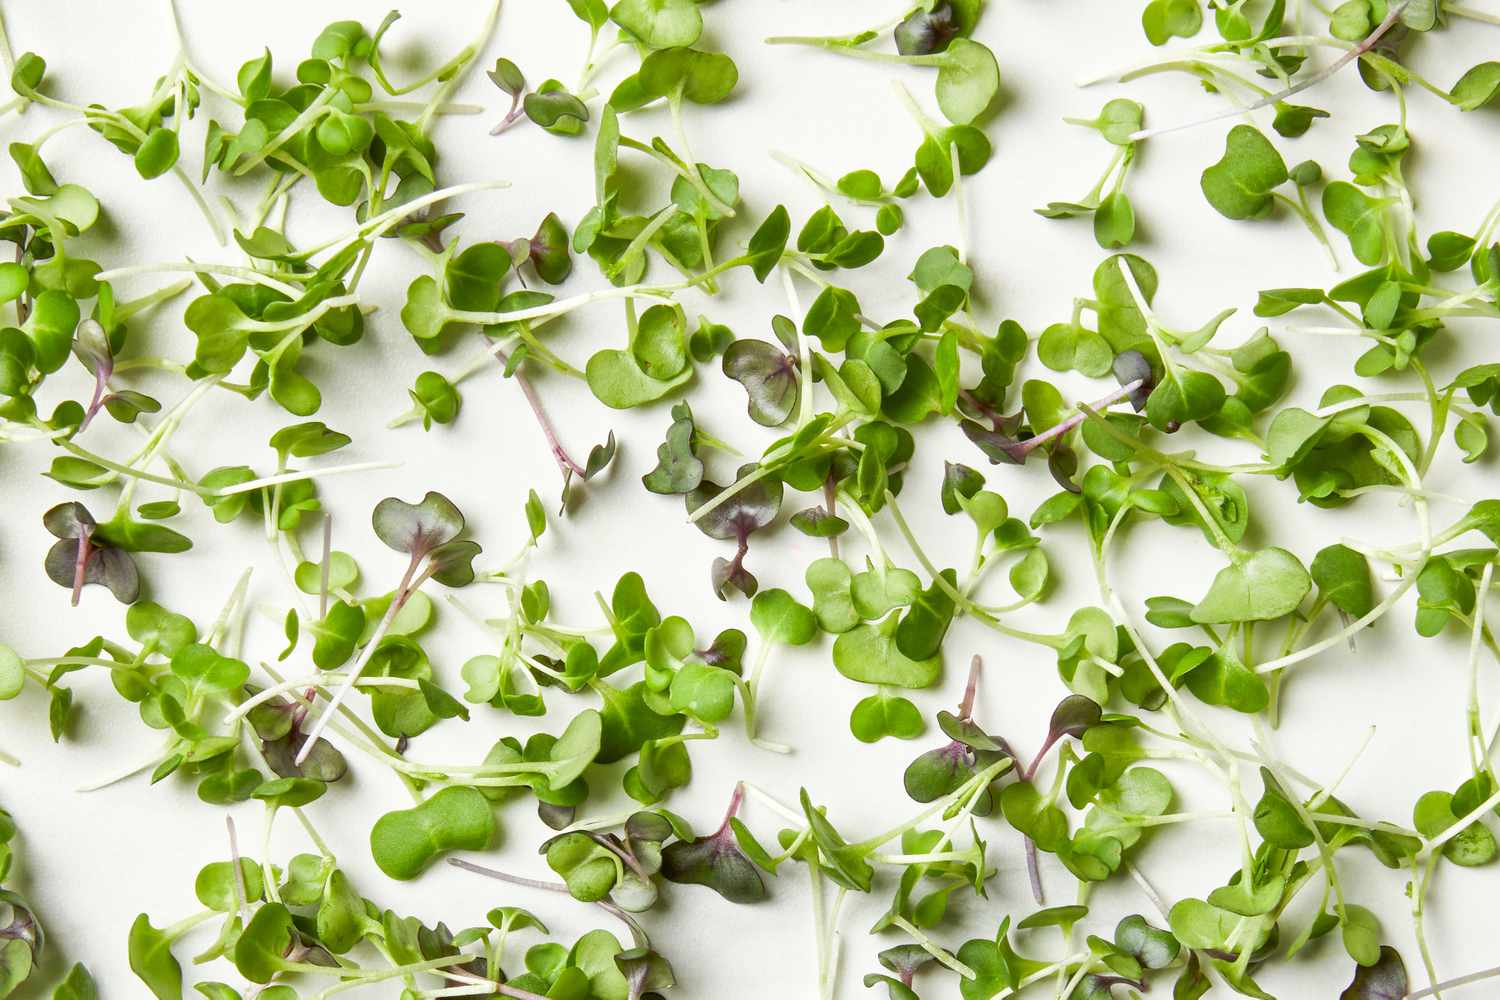 Microgreens scattered on a marble surface